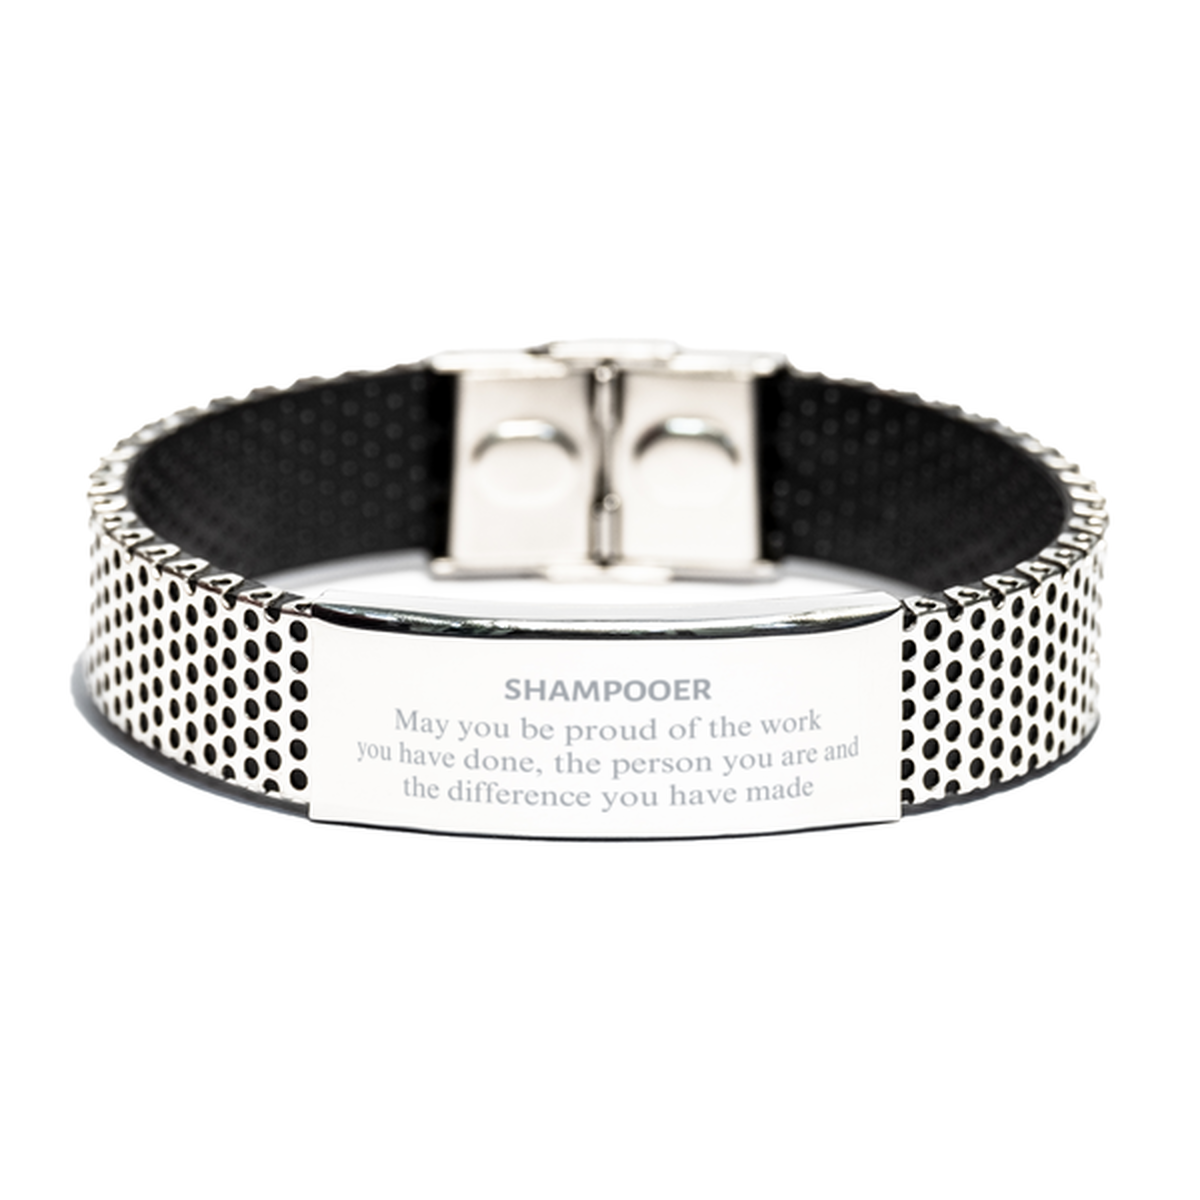 Shampooer May you be proud of the work you have done, Retirement Shampooer Stainless Steel Bracelet for Colleague Appreciation Gifts Amazing for Shampooer